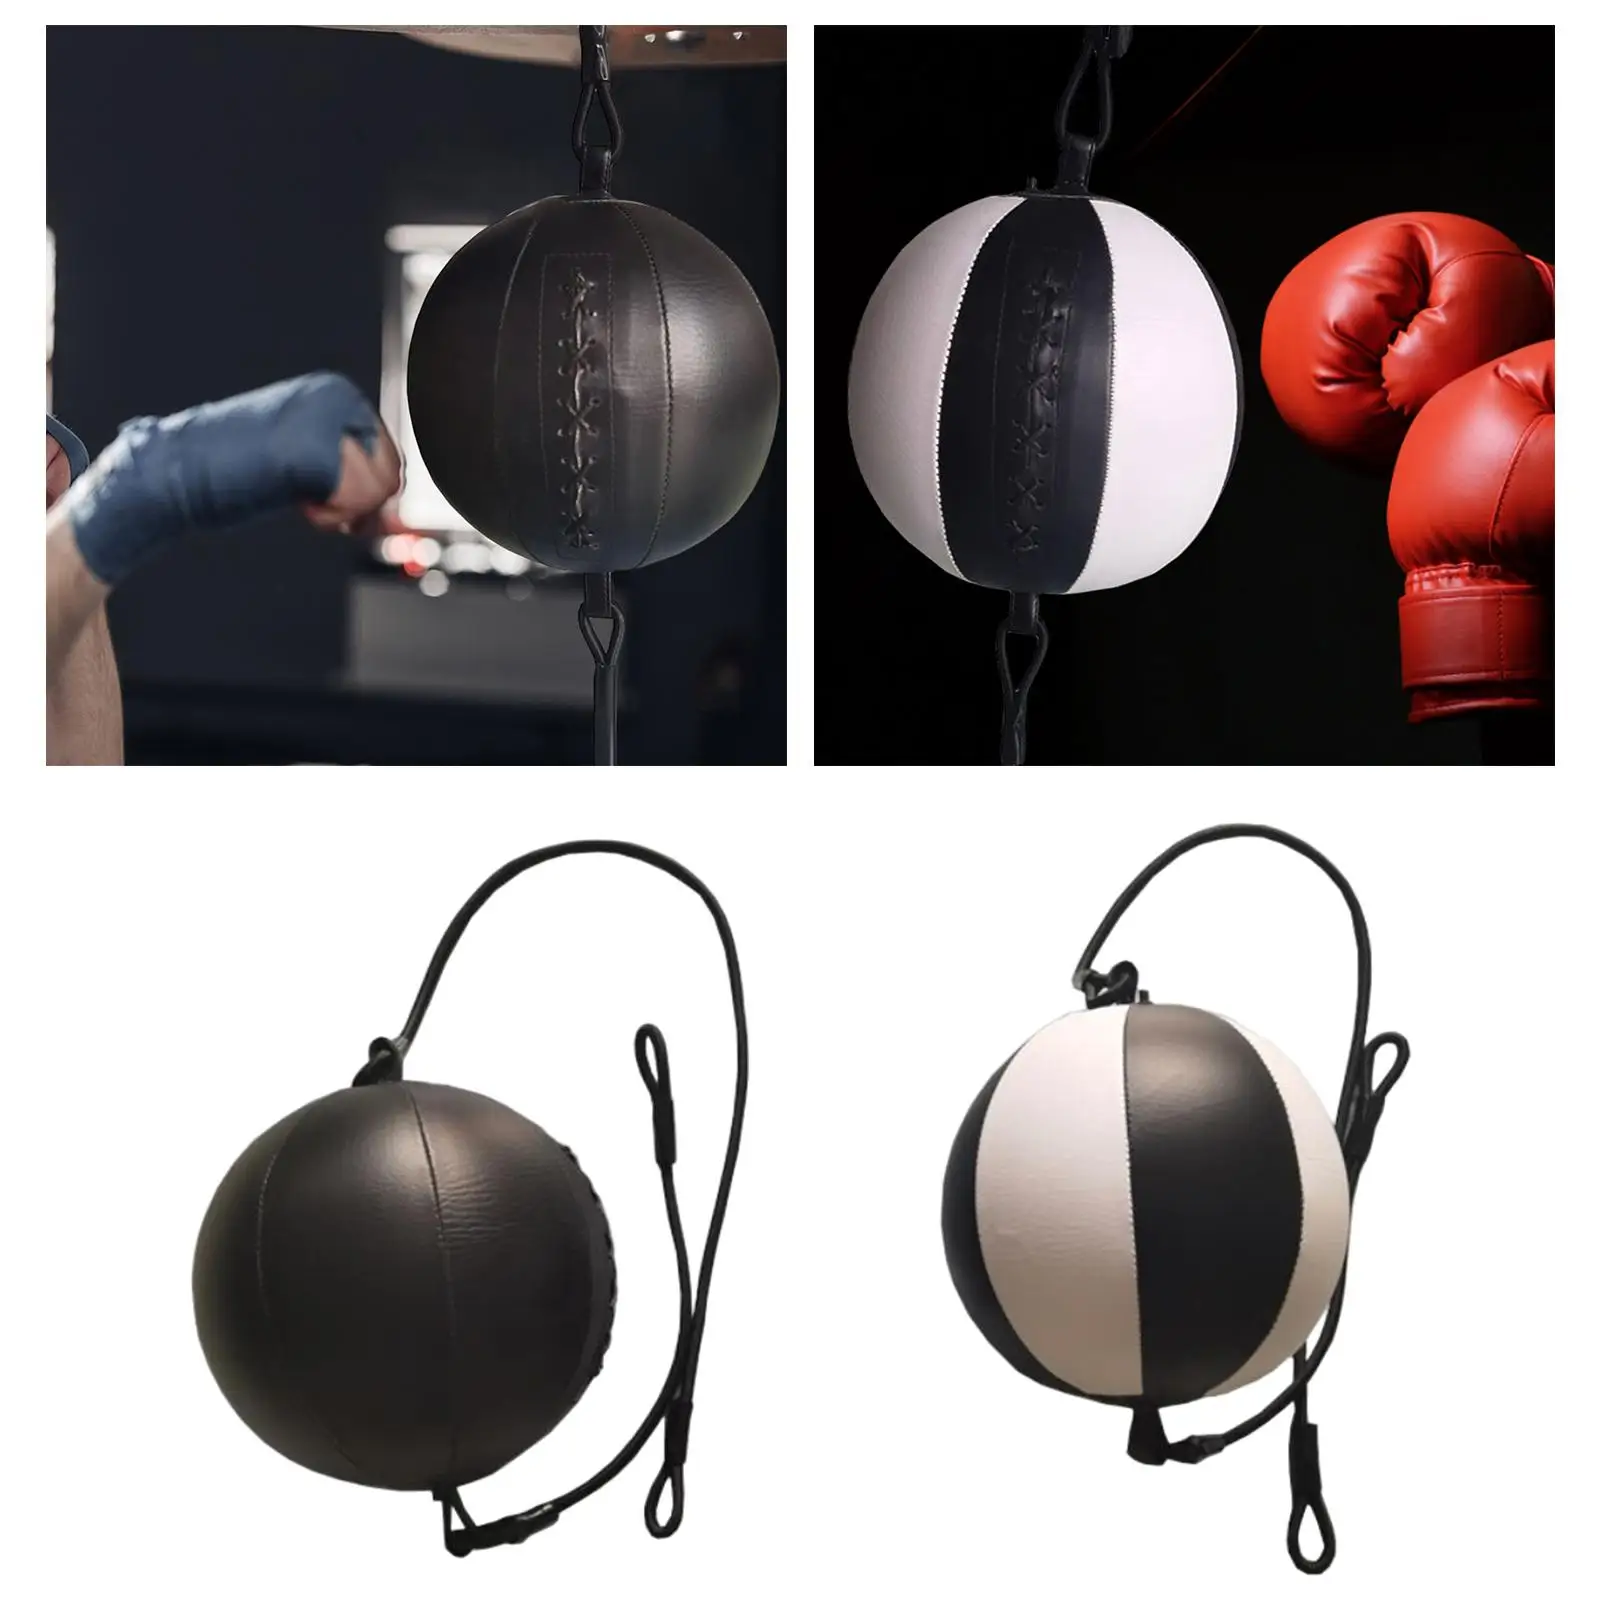 idealsgarden PU Boxing Speed Ball Elastic Rope for Practice Sparring Fitness